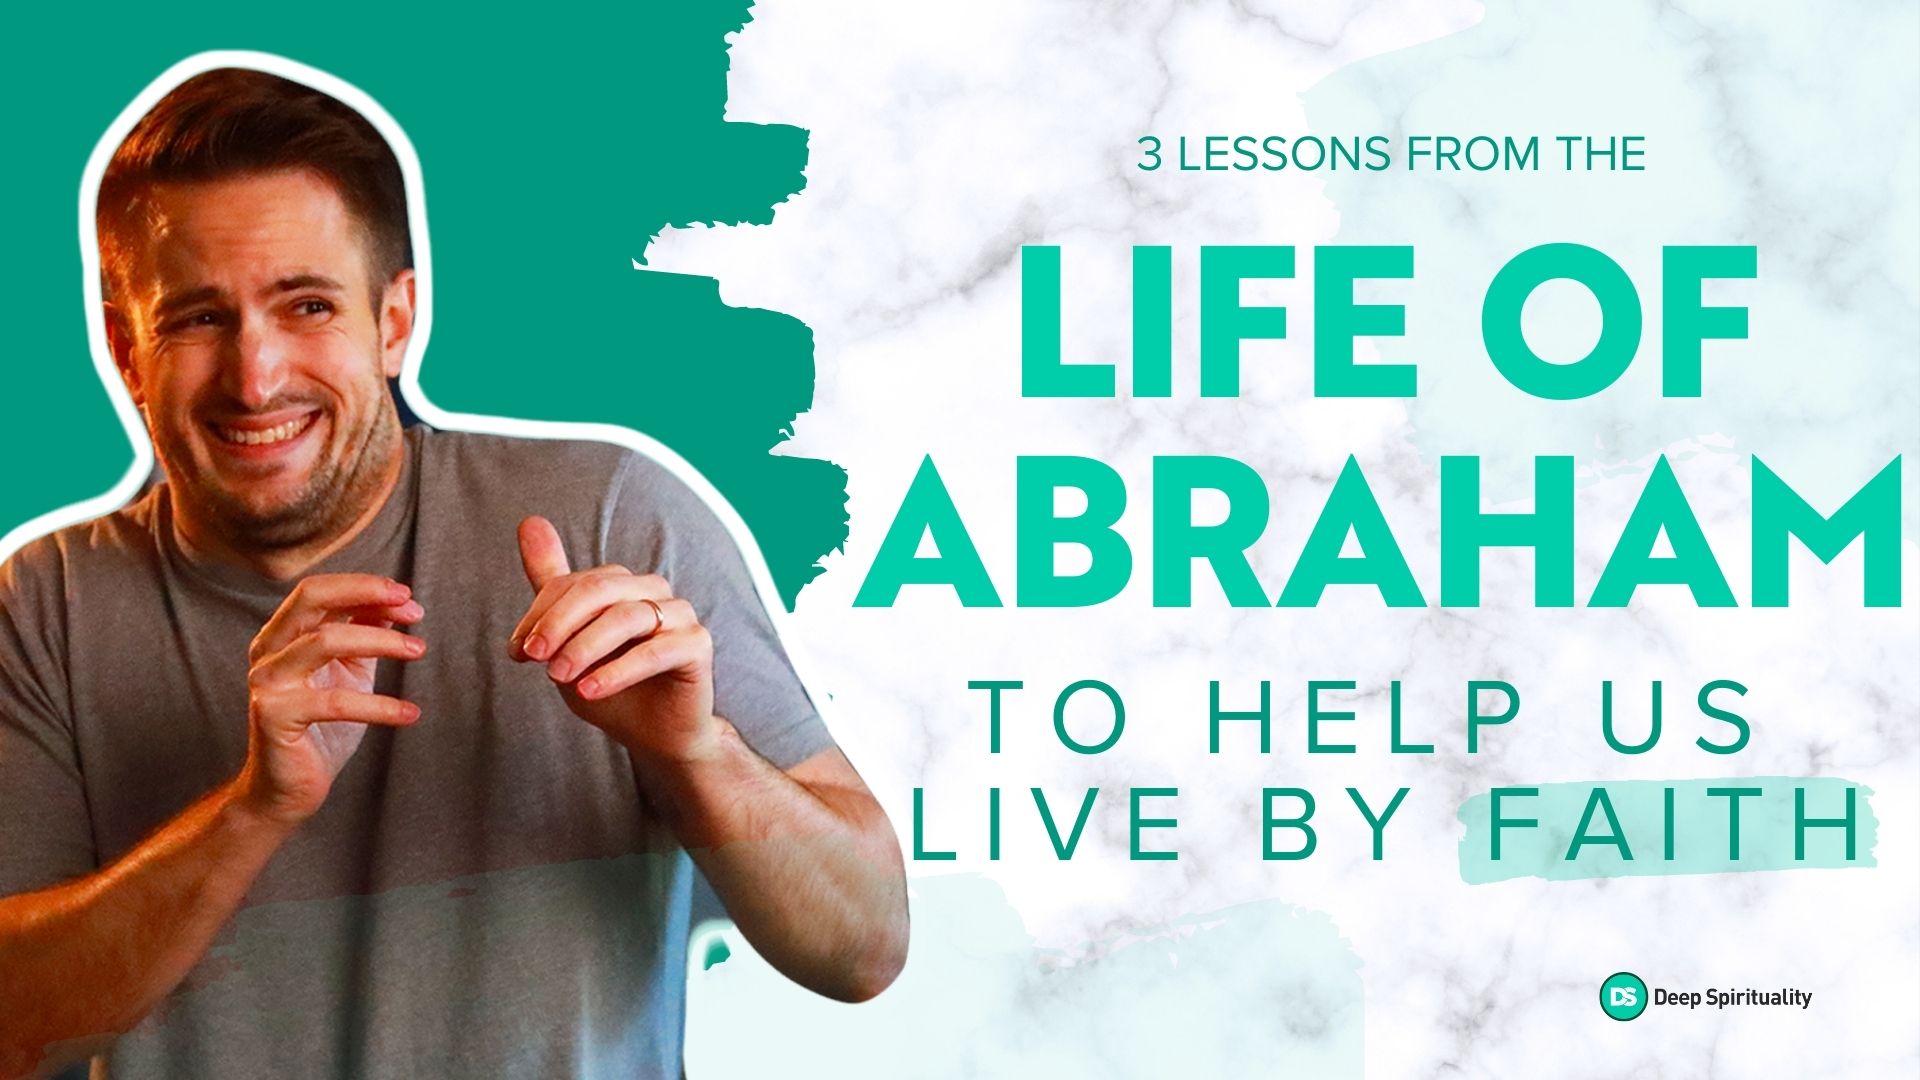 3 lessons from the life of Abraham to help us live by faith